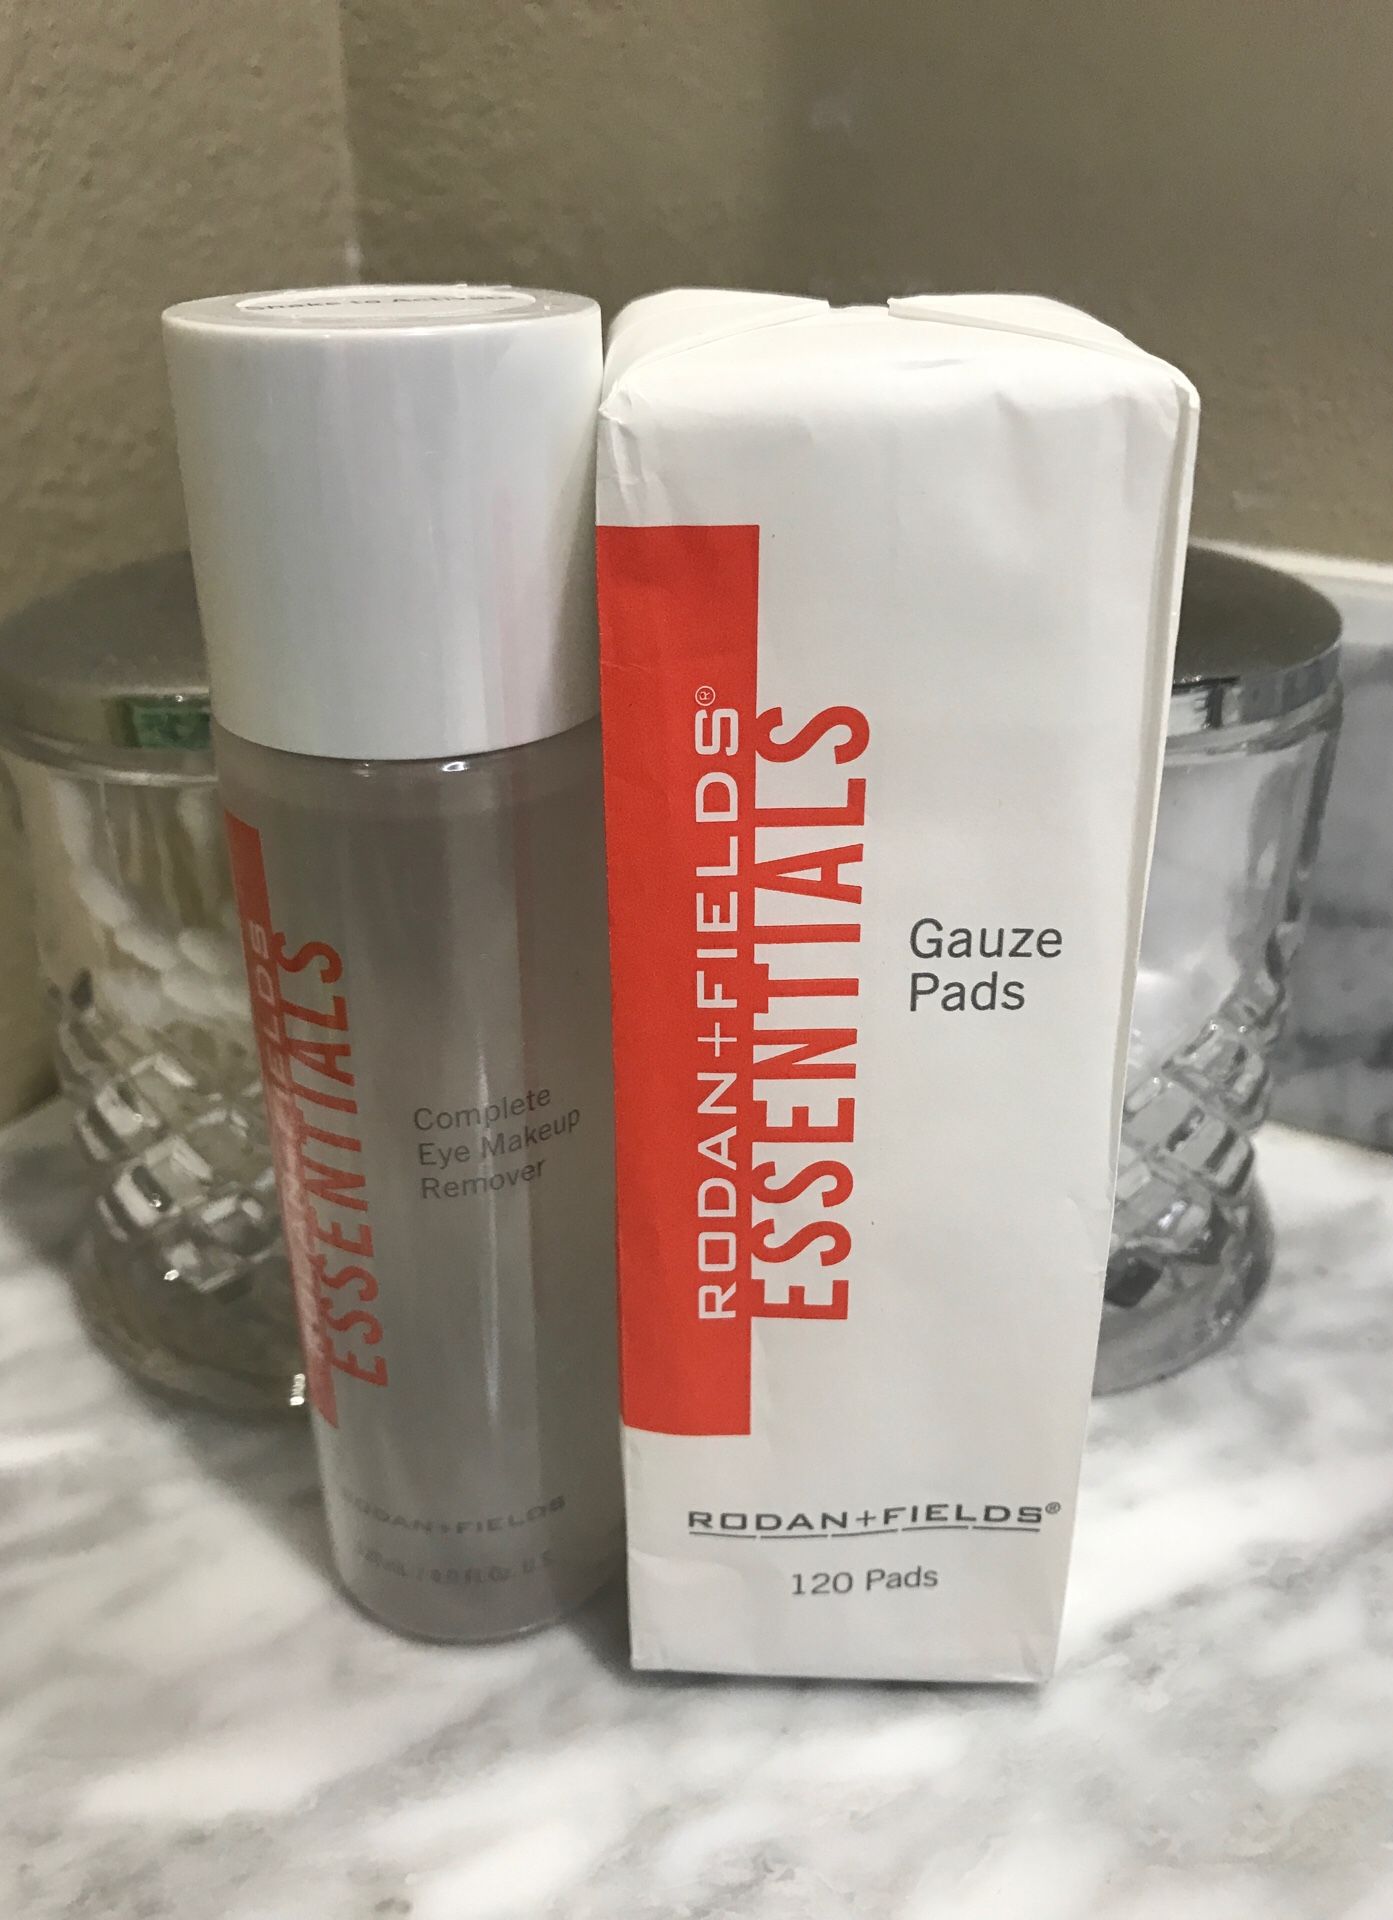 Rodan and Fields Eye Makeup Remover and Gauze Pads